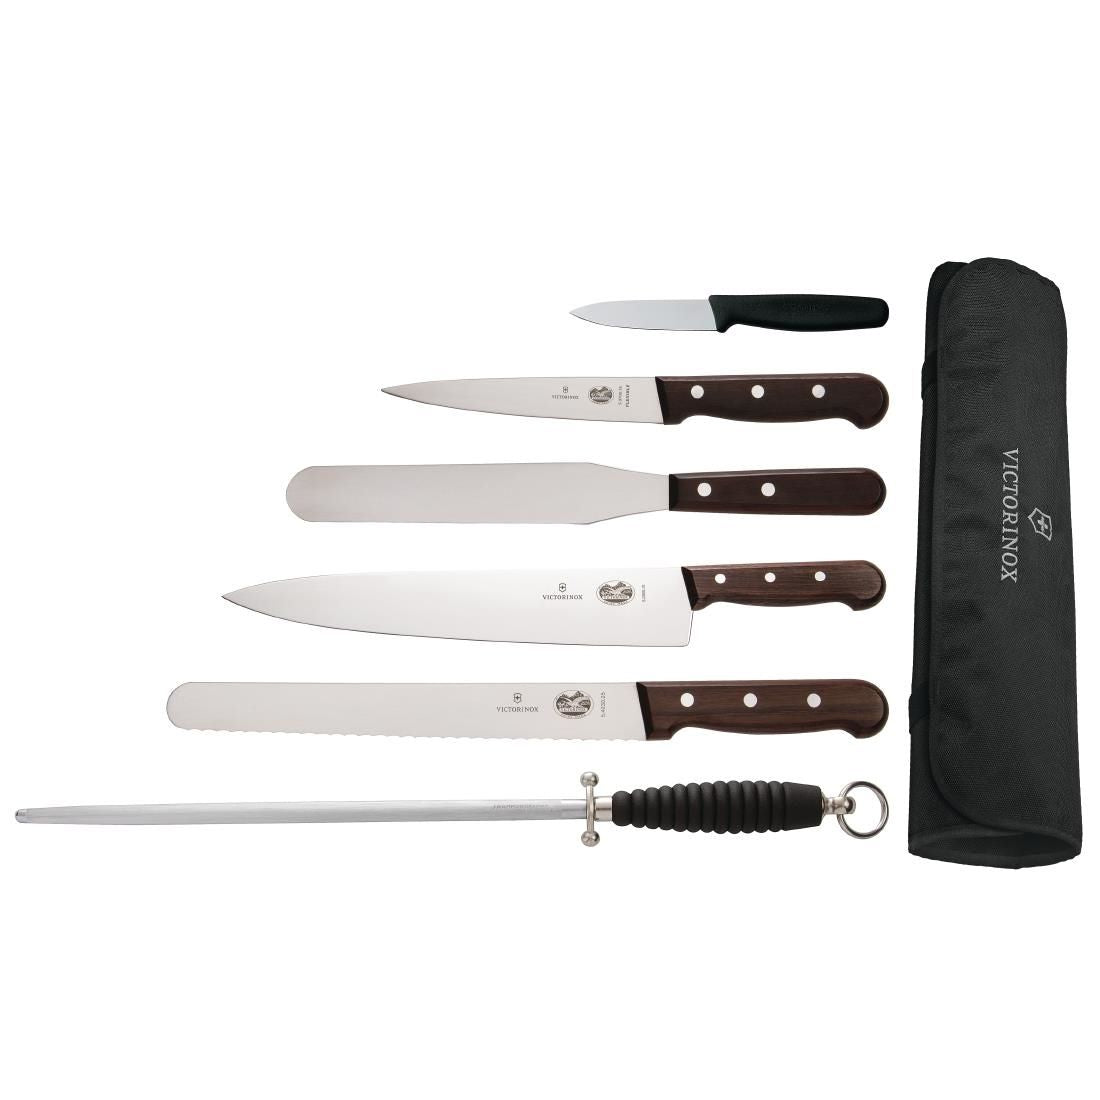 ( Availability TBC ) S188 Victorinox 6 Piece Rosewood Knife Set with 20cm Chefs Knife with Wallet JD Catering Equipment Solutions Ltd